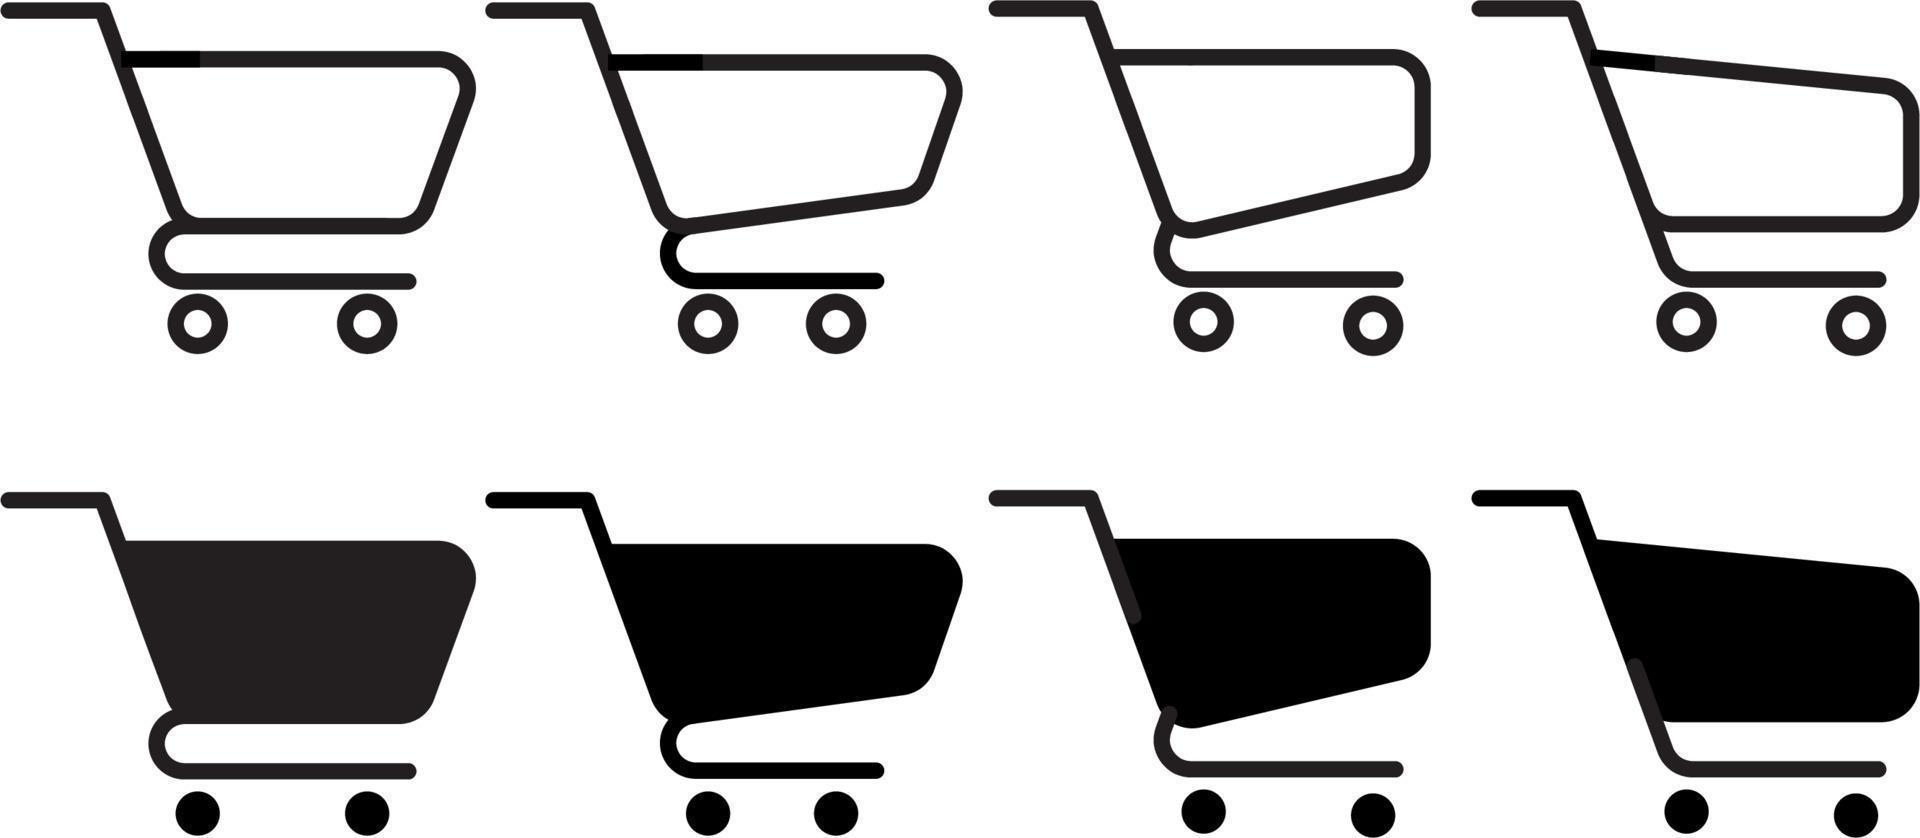 shopping cart and trolley simple icon vector